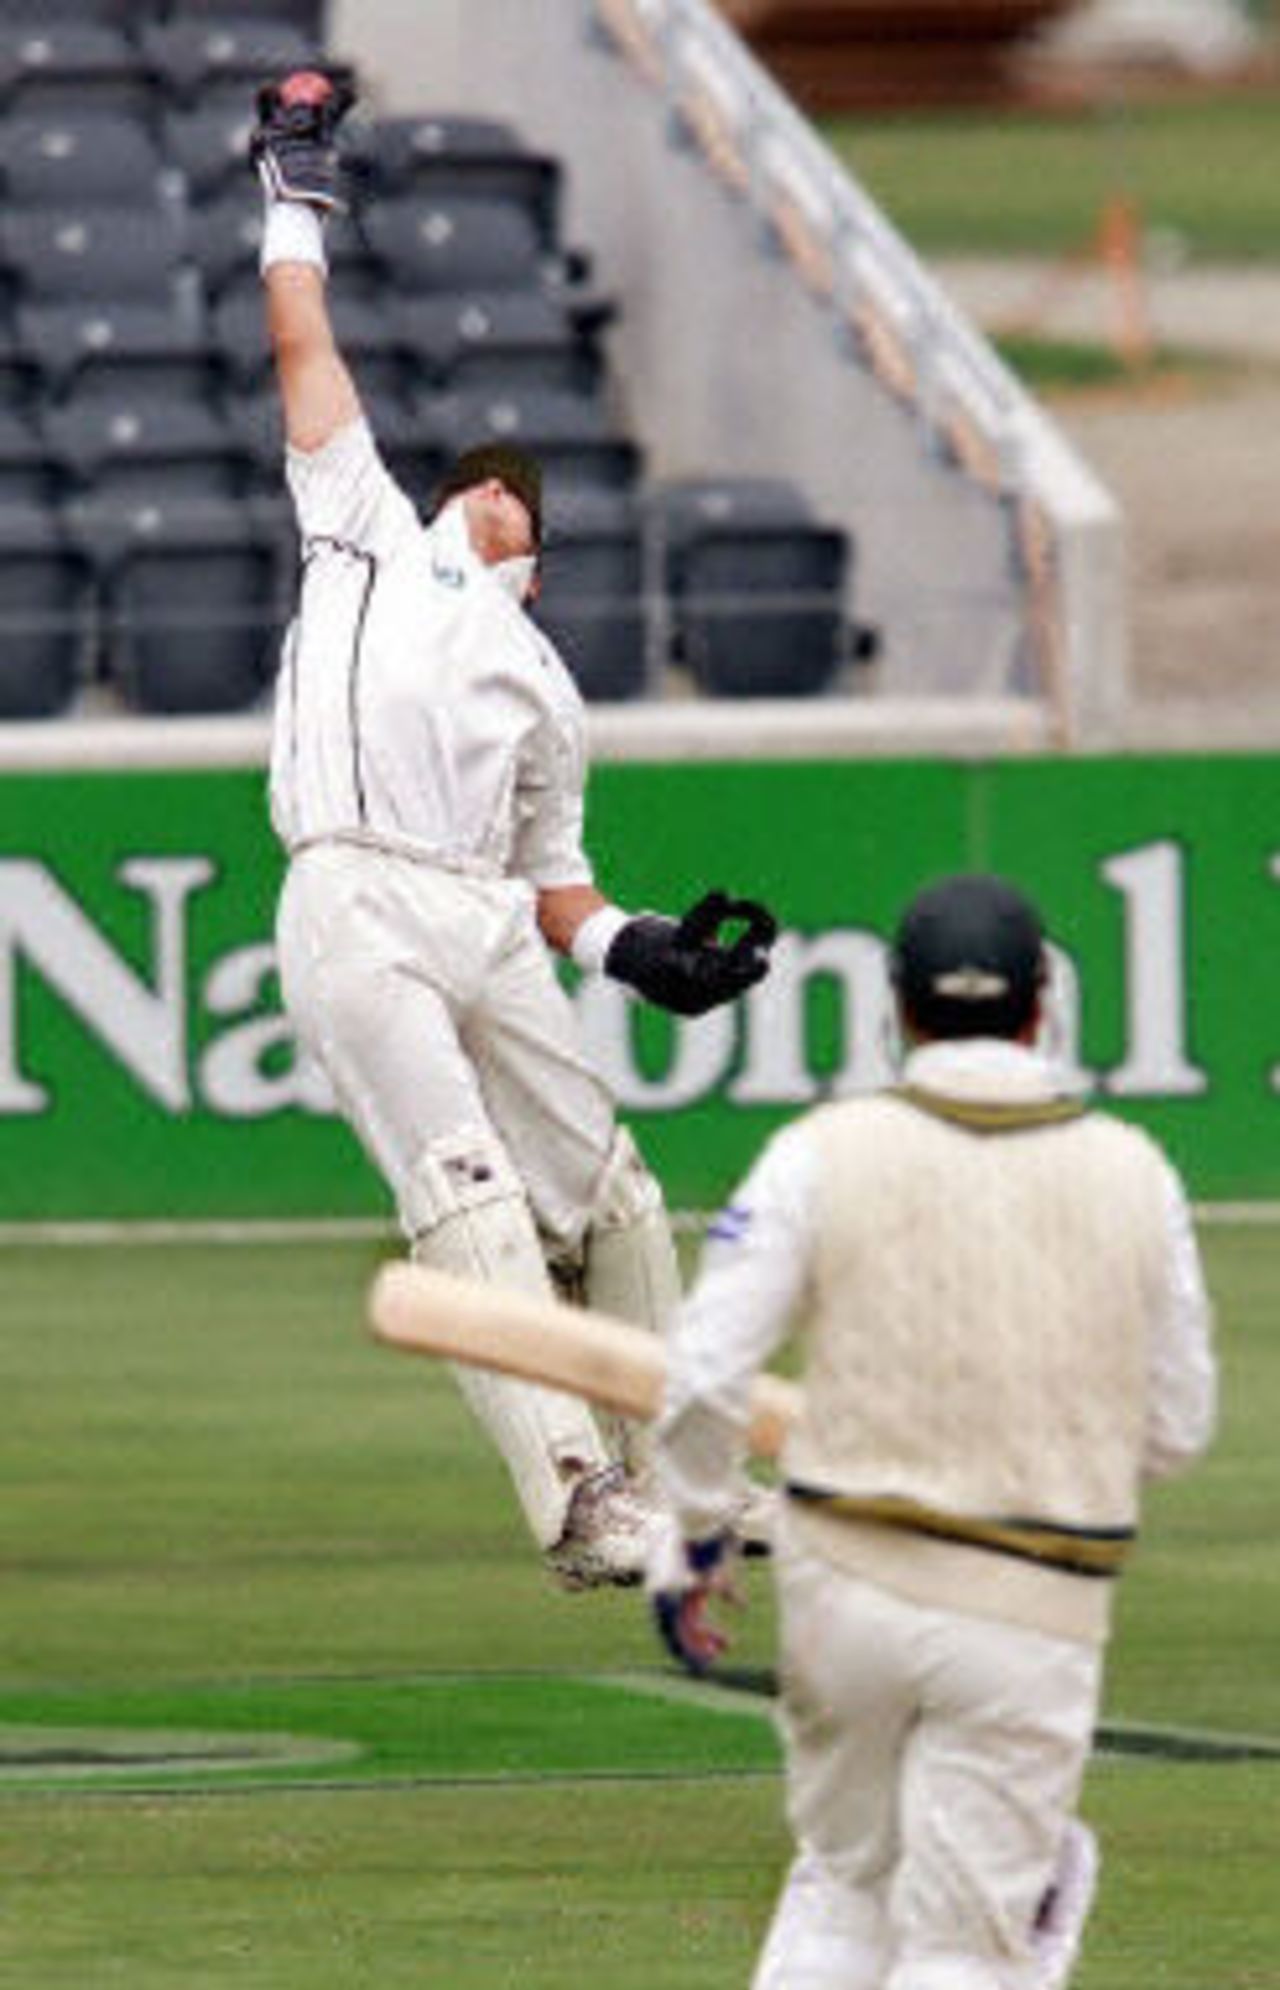 New Zealand wicketkeeper Adam Parore (L) leaps high in the air to catch Pakistan batsman Waqar Younis, day 5, 2nd Test at Christchurch, 15-19 March 2001.